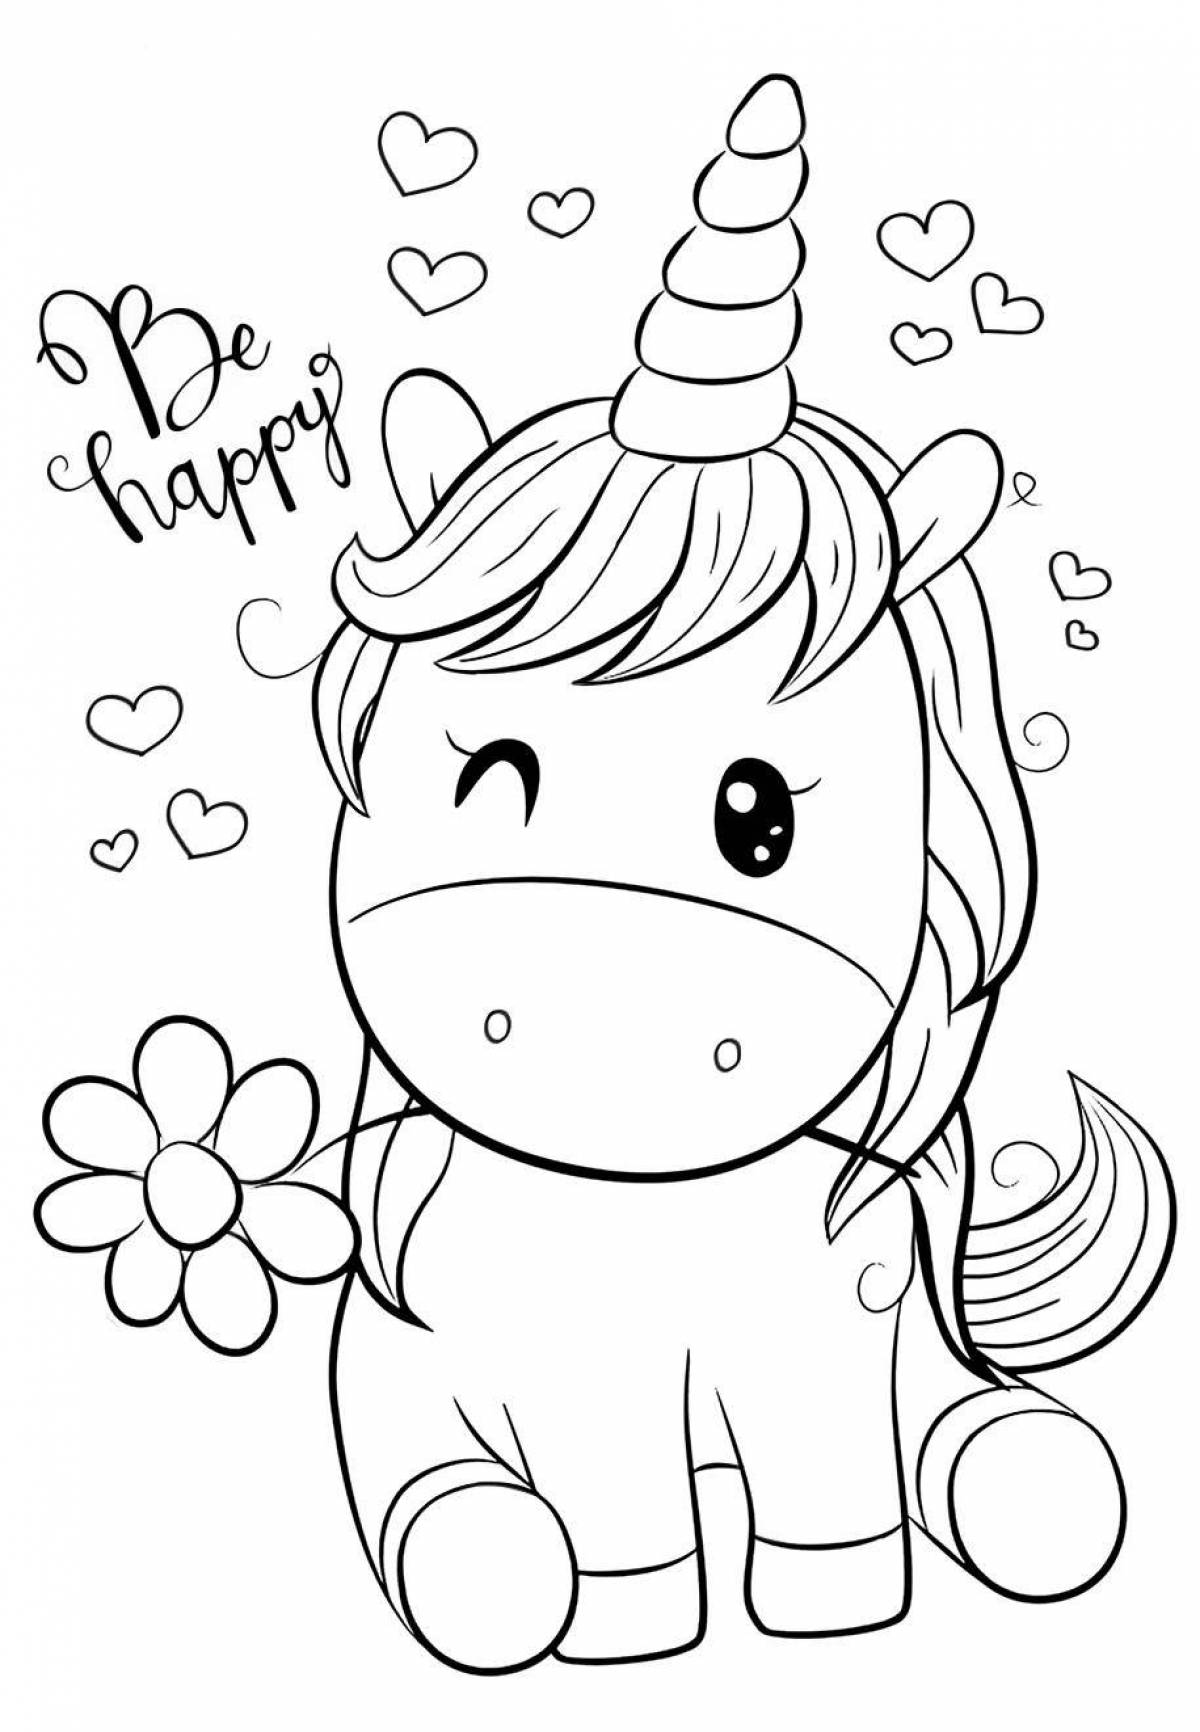 Great cute unicorn coloring book for kids